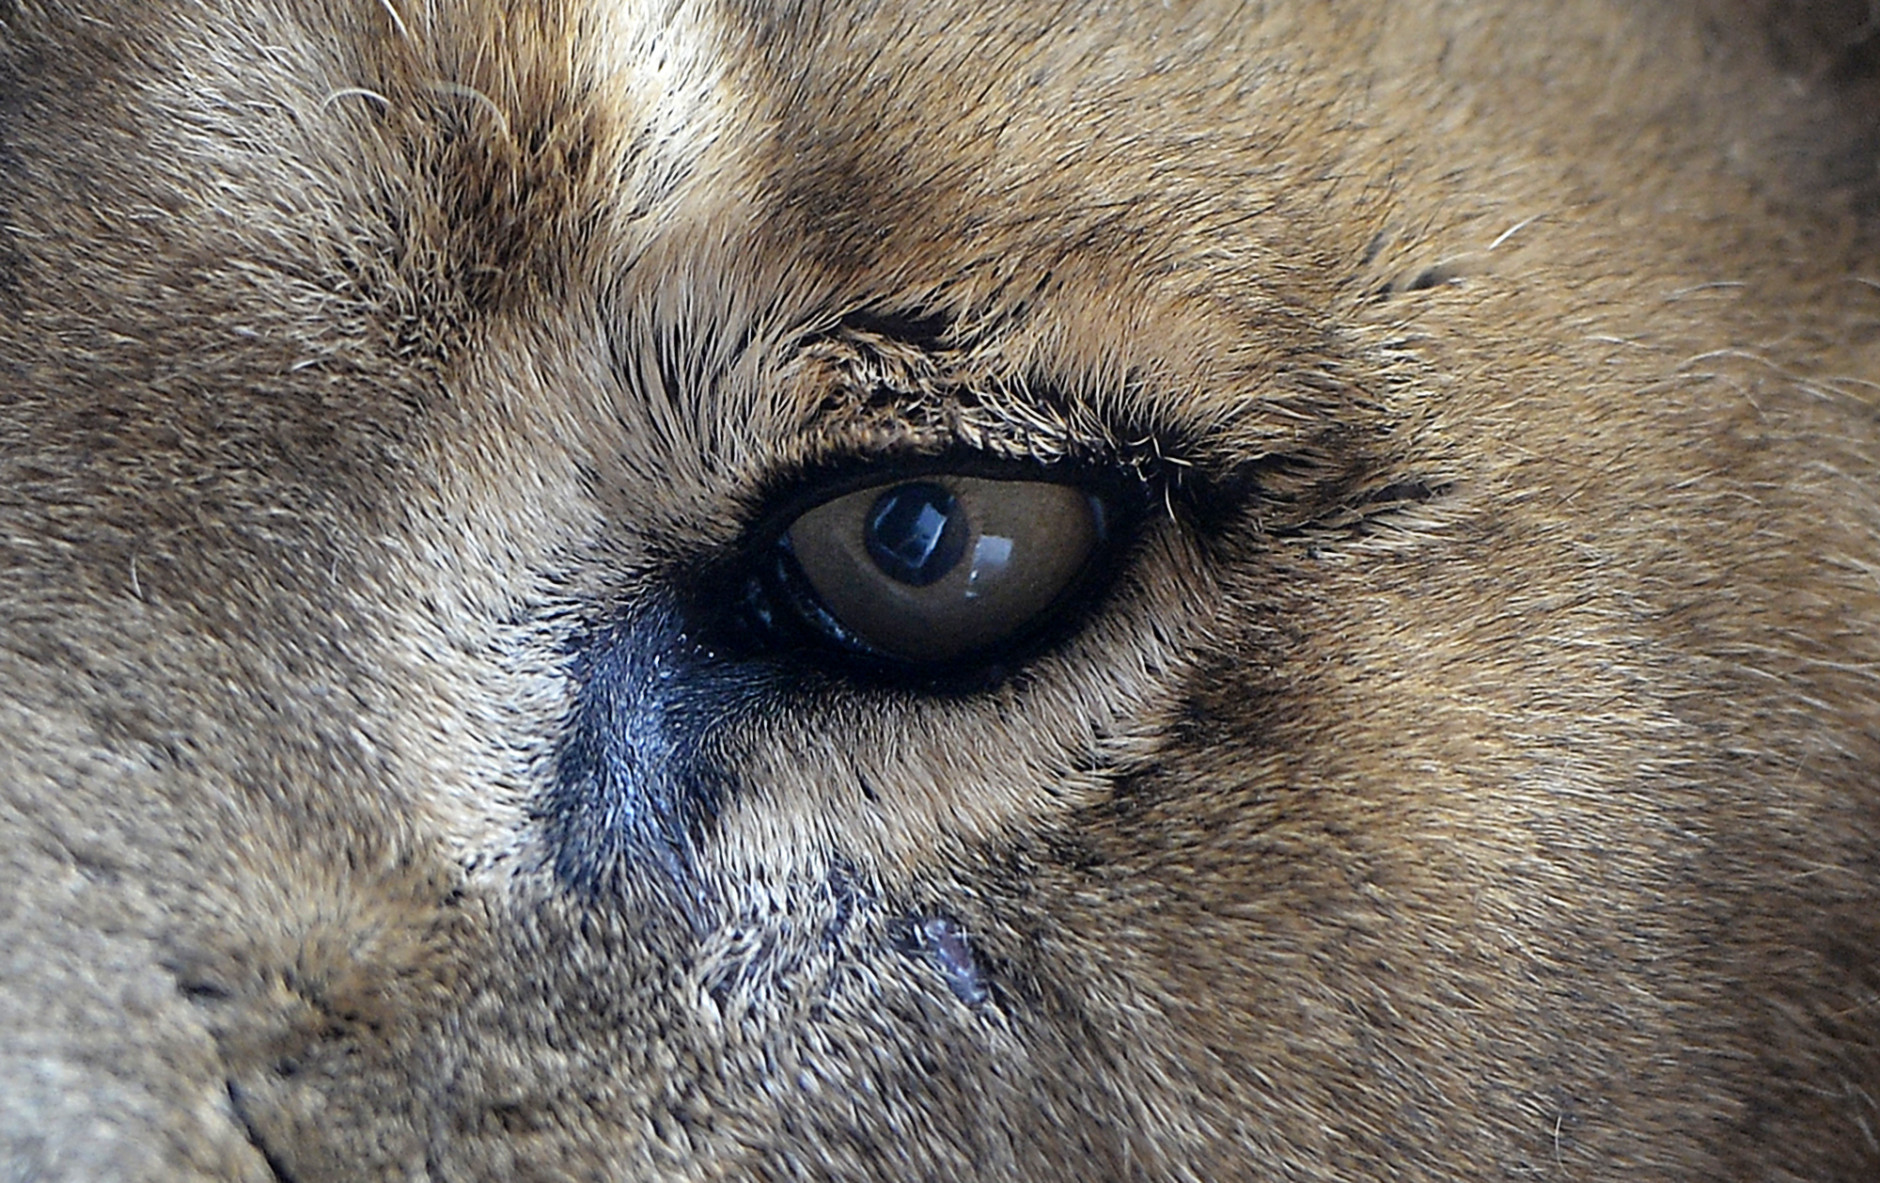 The eye of a lion photographed  at the zoo in Gelsenkirchen, Germany, Tuesday, Jan. 6, 2015. (AP Photo/Martin Meissner)